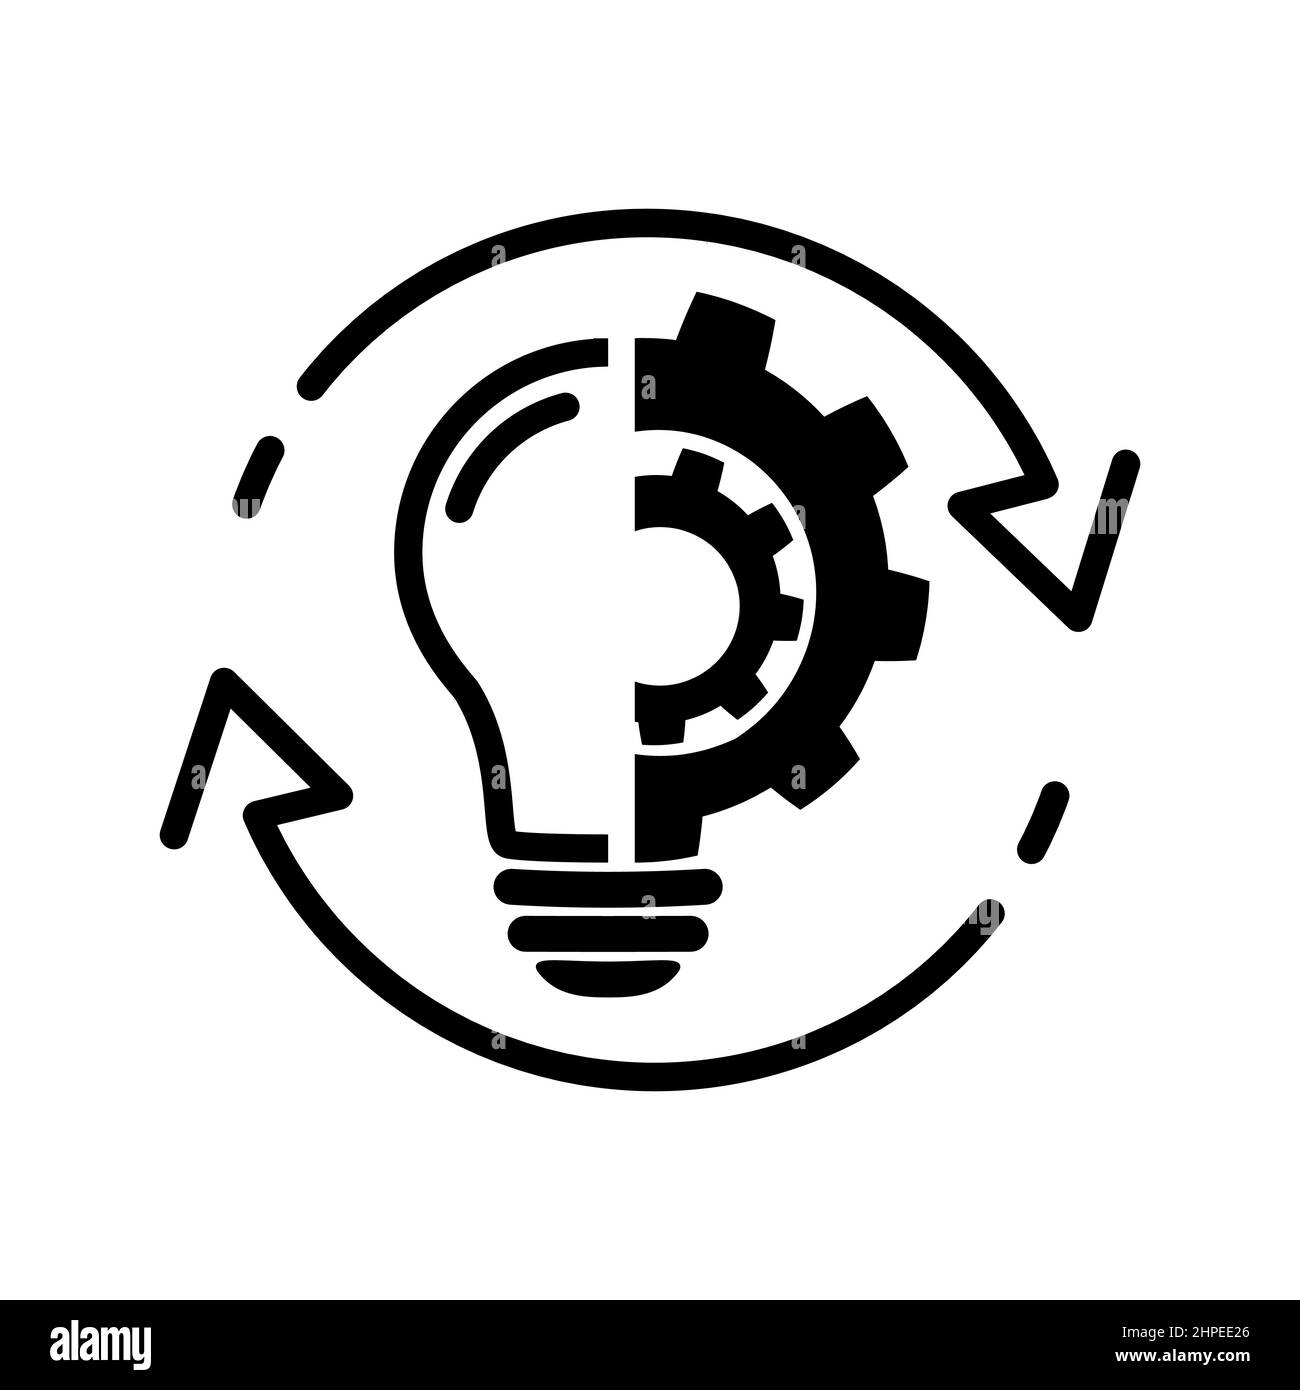 Ideas and process icon in flat style. Implementation concept. Light bulb with gear and arrows icon. Creative cycle symbol isolated on white. Vector il Stock Vector